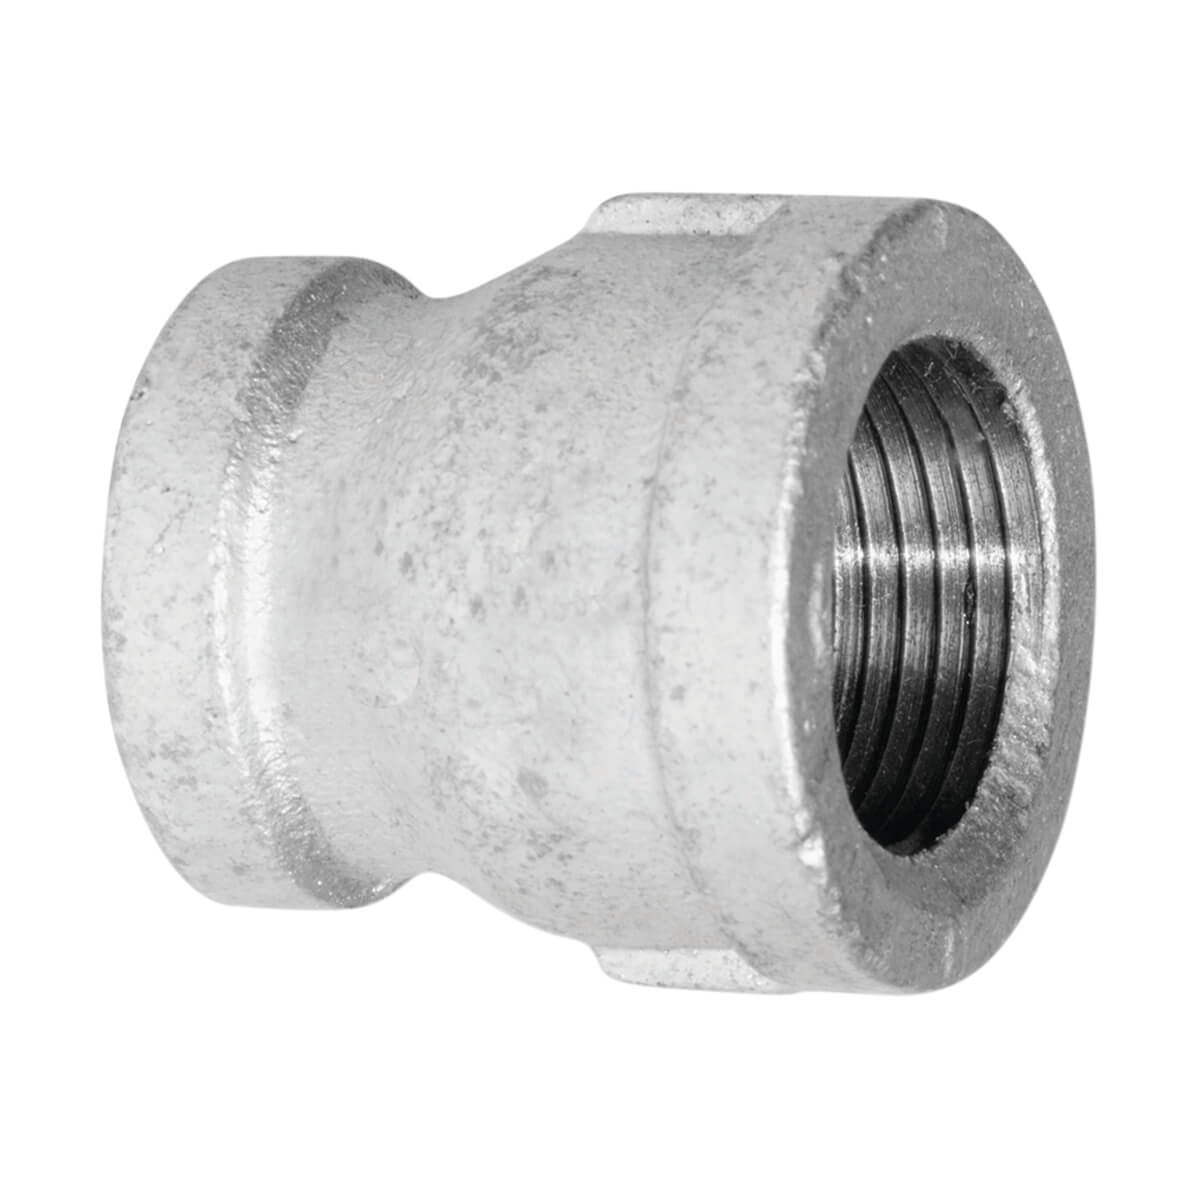 Fittings Galvanized Iron Coupling - 1-½-in x 1-¼-in